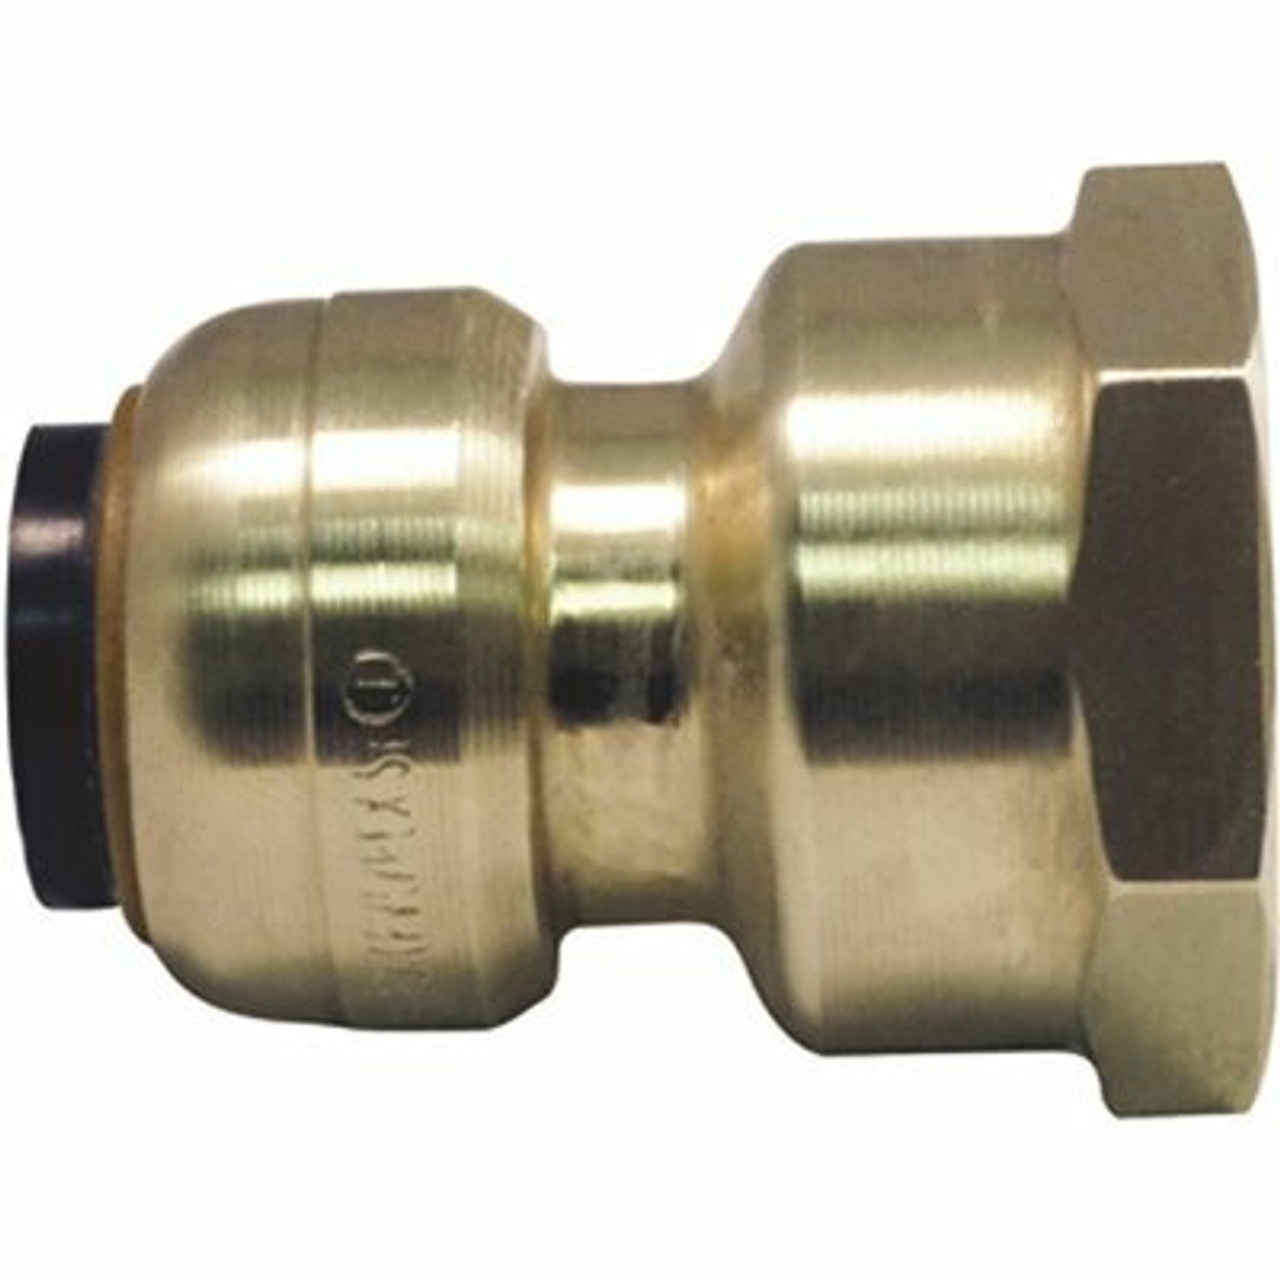 Tectite 1/2 In. Brass Push-To-Connect X 3/4 In. Female Pipe Thread Reducing Adapter